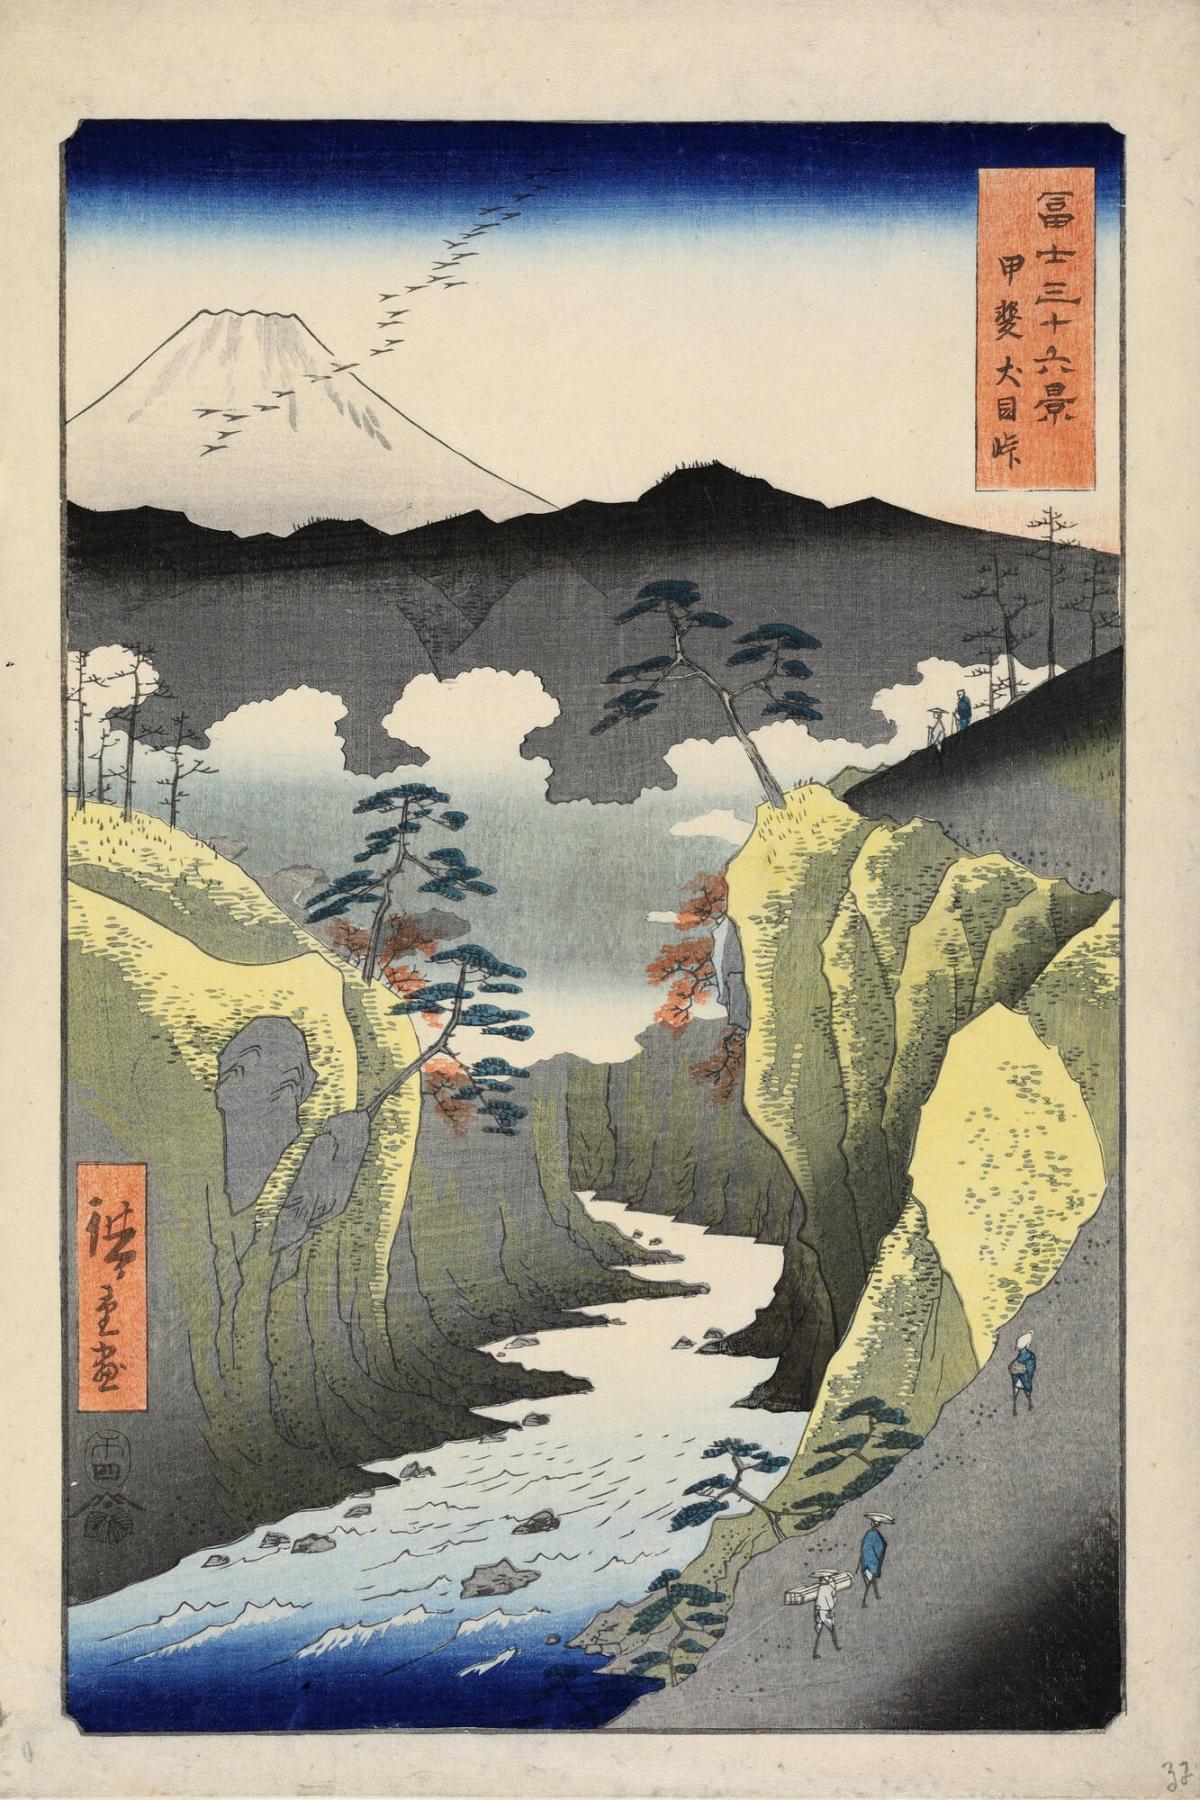 The Dog's-eye Pass in Kai Province, no. 32 from the series Thirty-six Views of Mt. Fuji